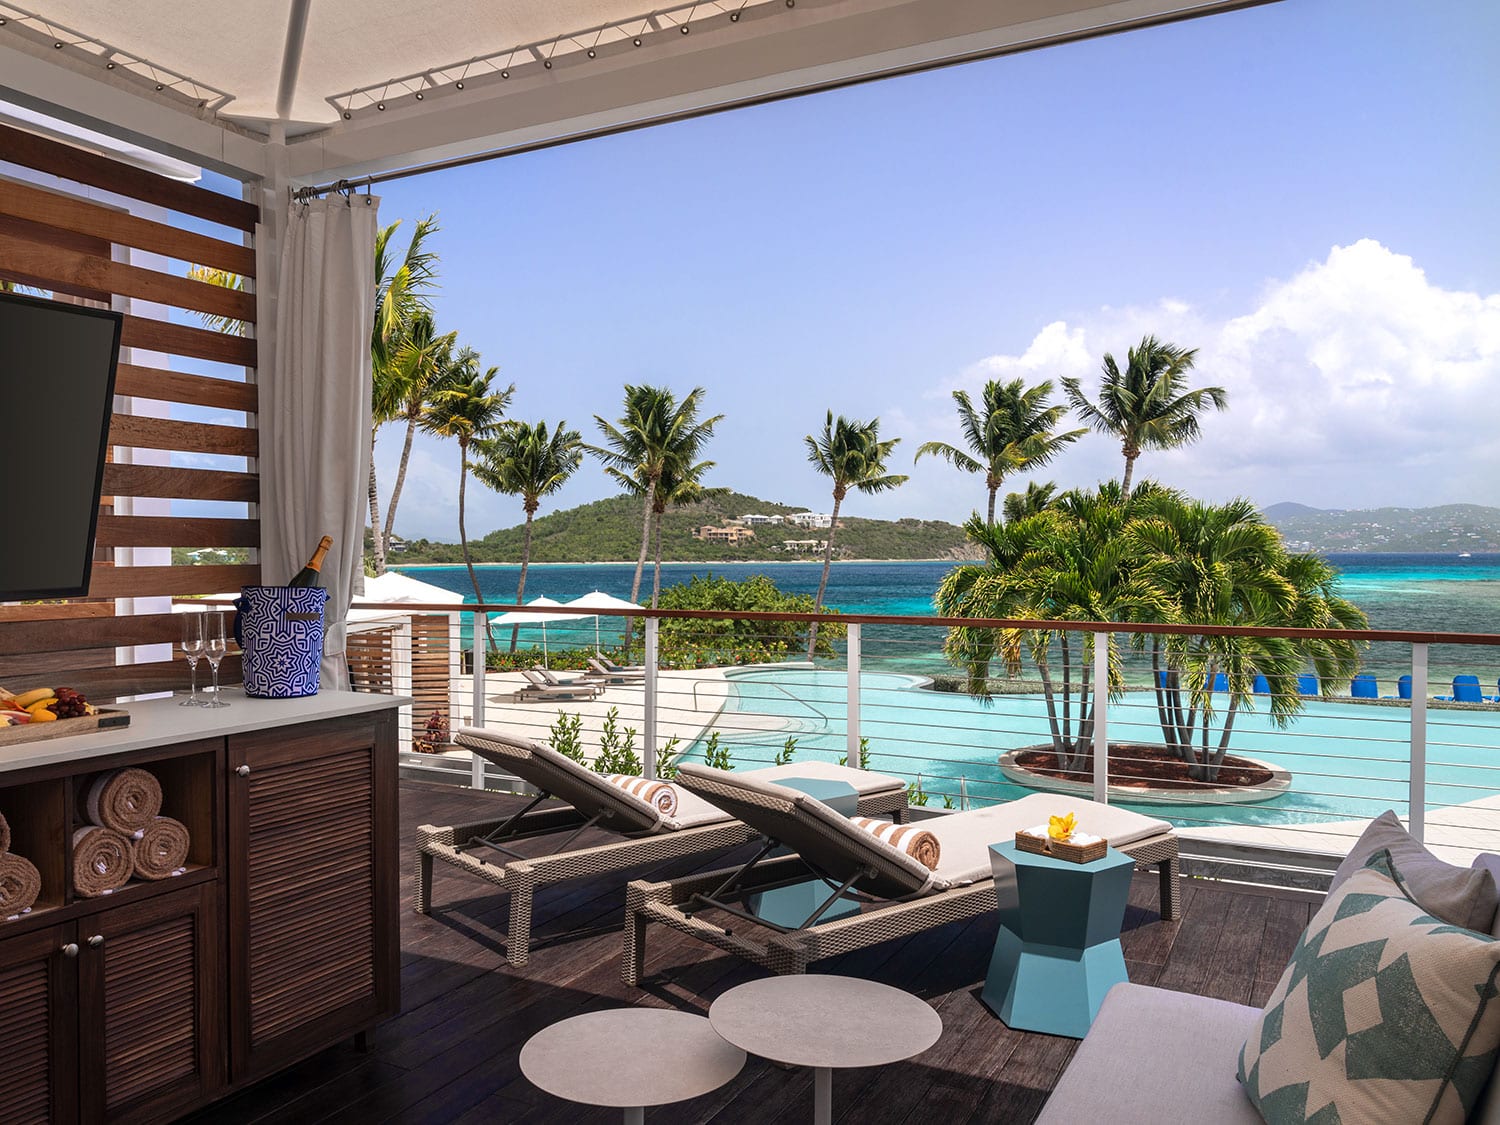 The view from a private pool cabana at the Ritz-Carlton, St. Thomas.